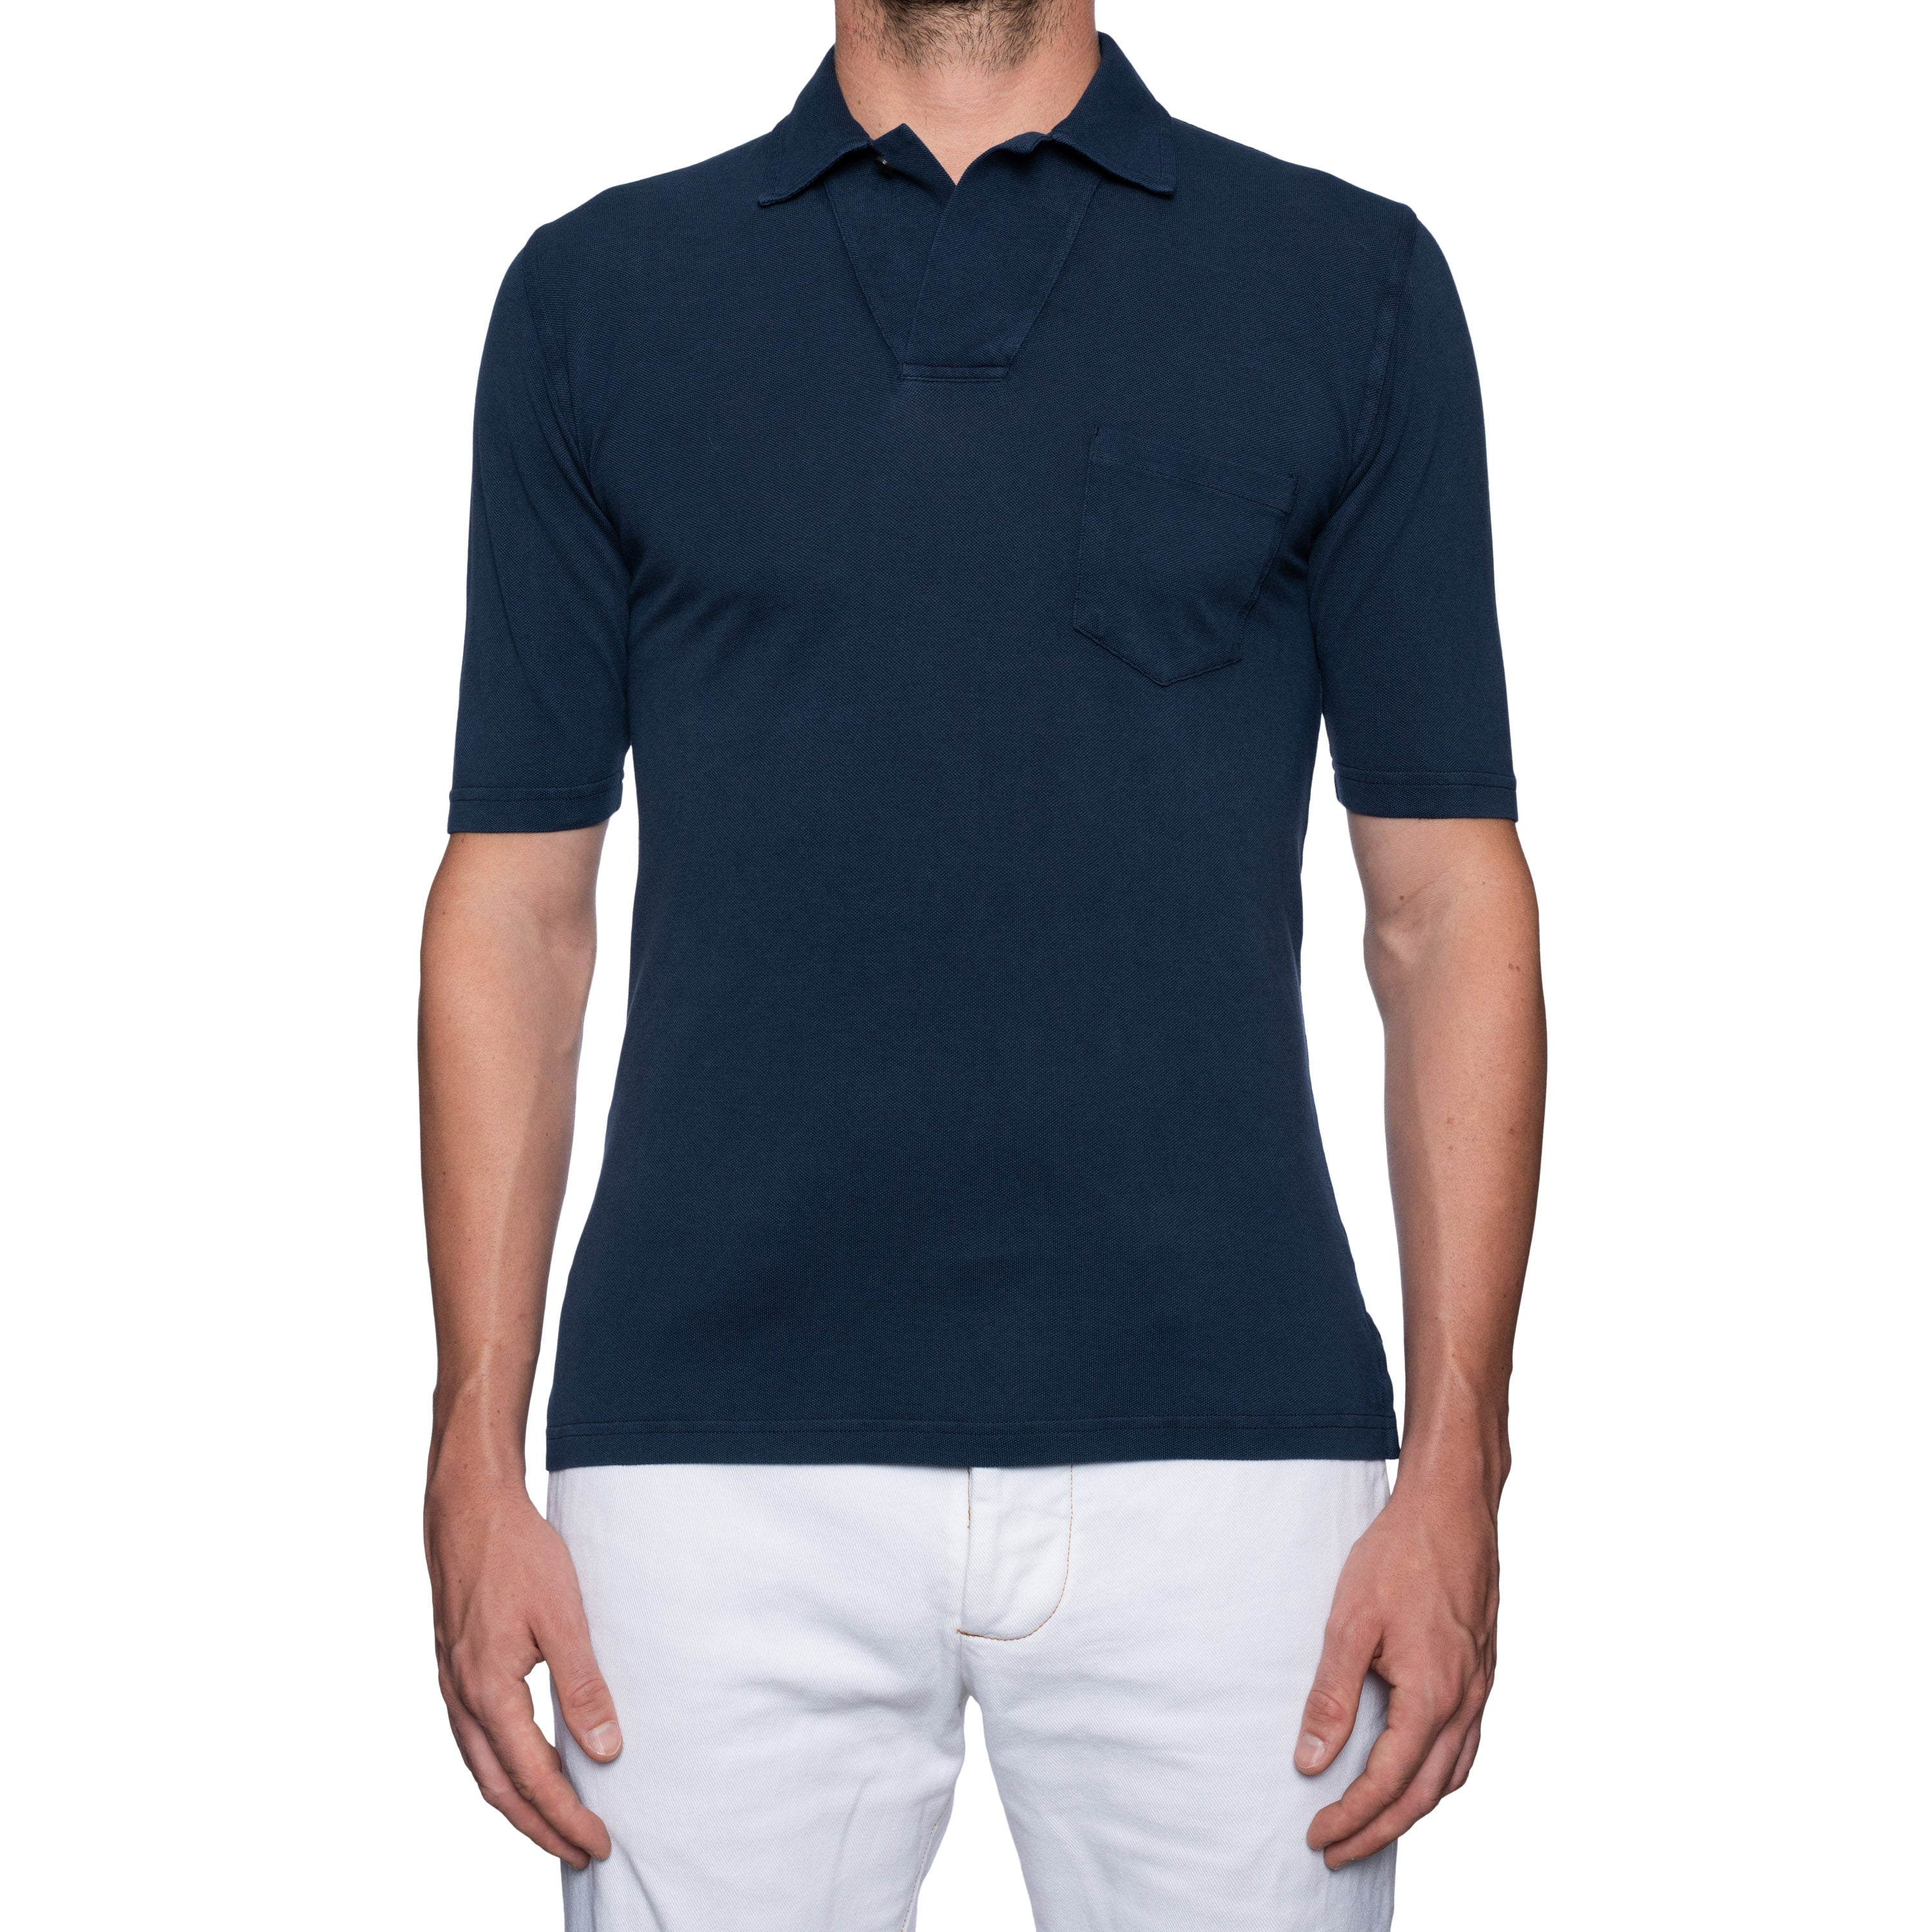 FEDELI 34 LAB Navy Blue Cotton Pique Frosted Short Sleeve Polo Shirt EU 48 NEW US S FEDELI